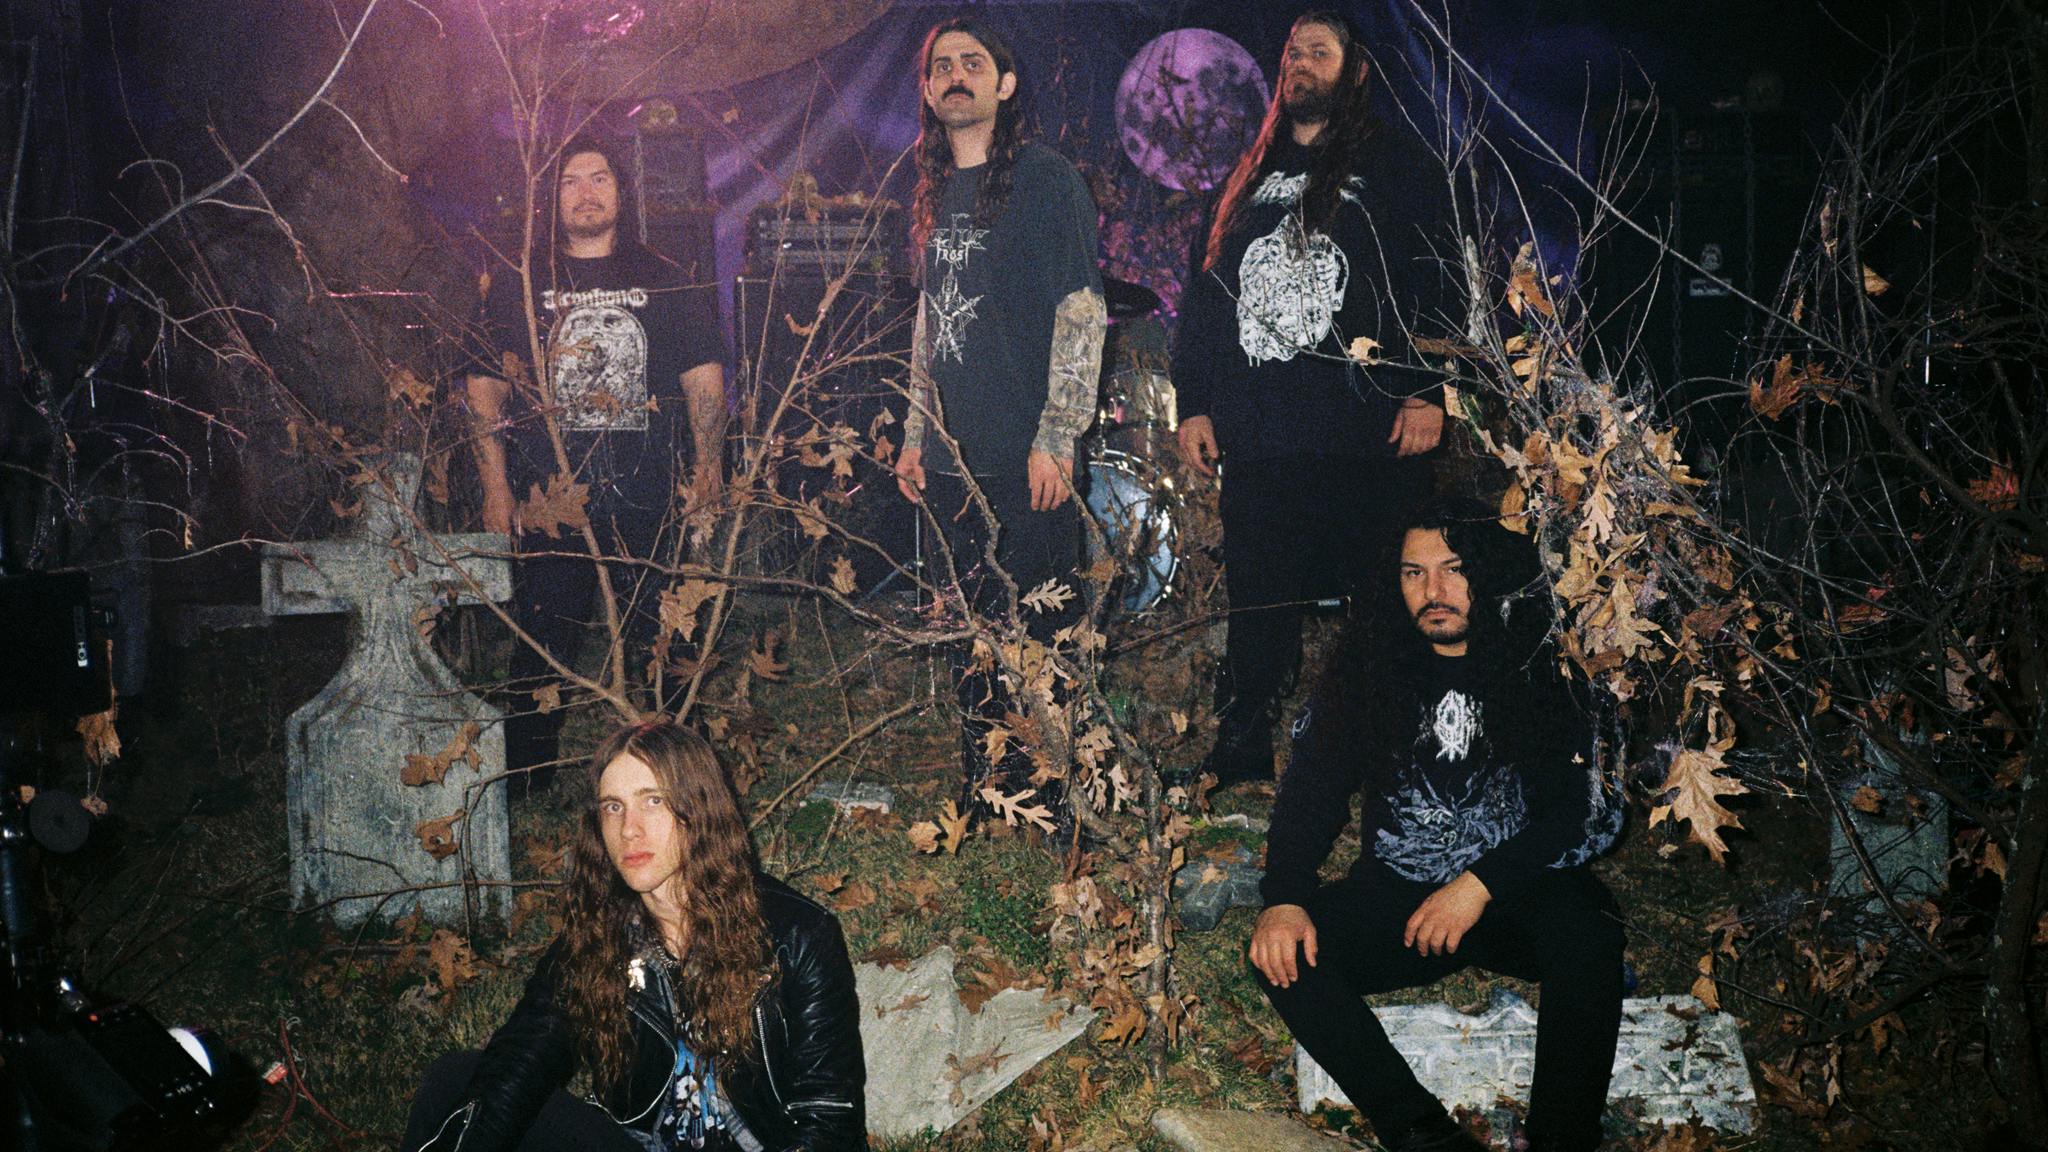 Gatecreeper: “I’ve gone deep into the ideas of superstition, death, luck and fate”